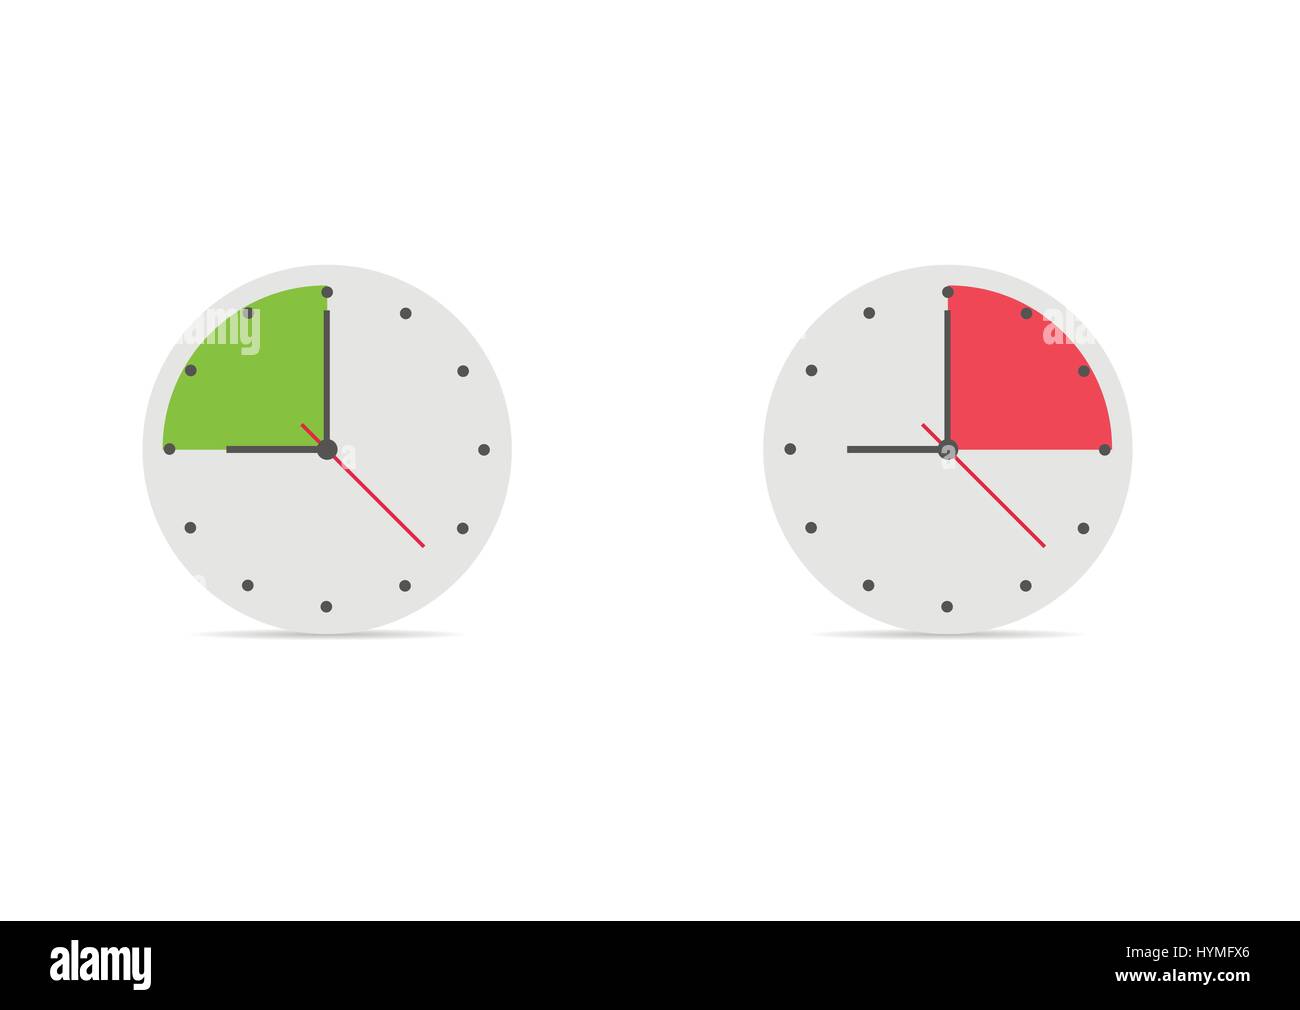 Simple watch icon Stock Vector